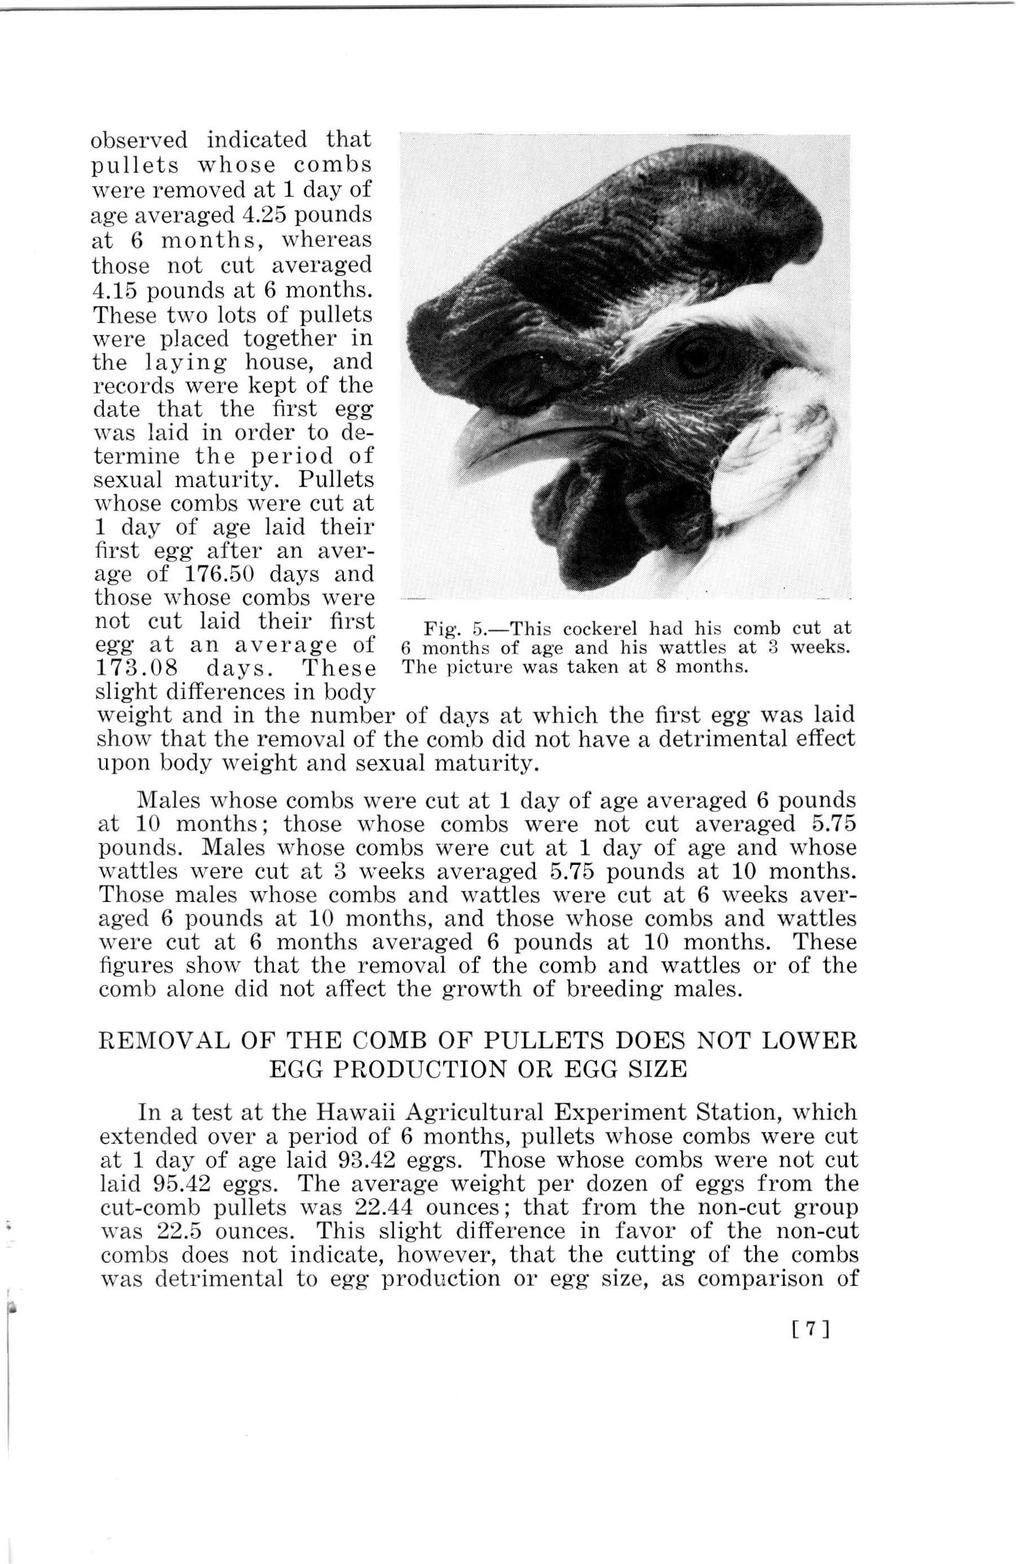 observed indicated that pullets whose combs were removed at 1 day of age averaged 4.25 pounds at 6 months, whereas those not cut averaged 4.15 pounds at 6 months.